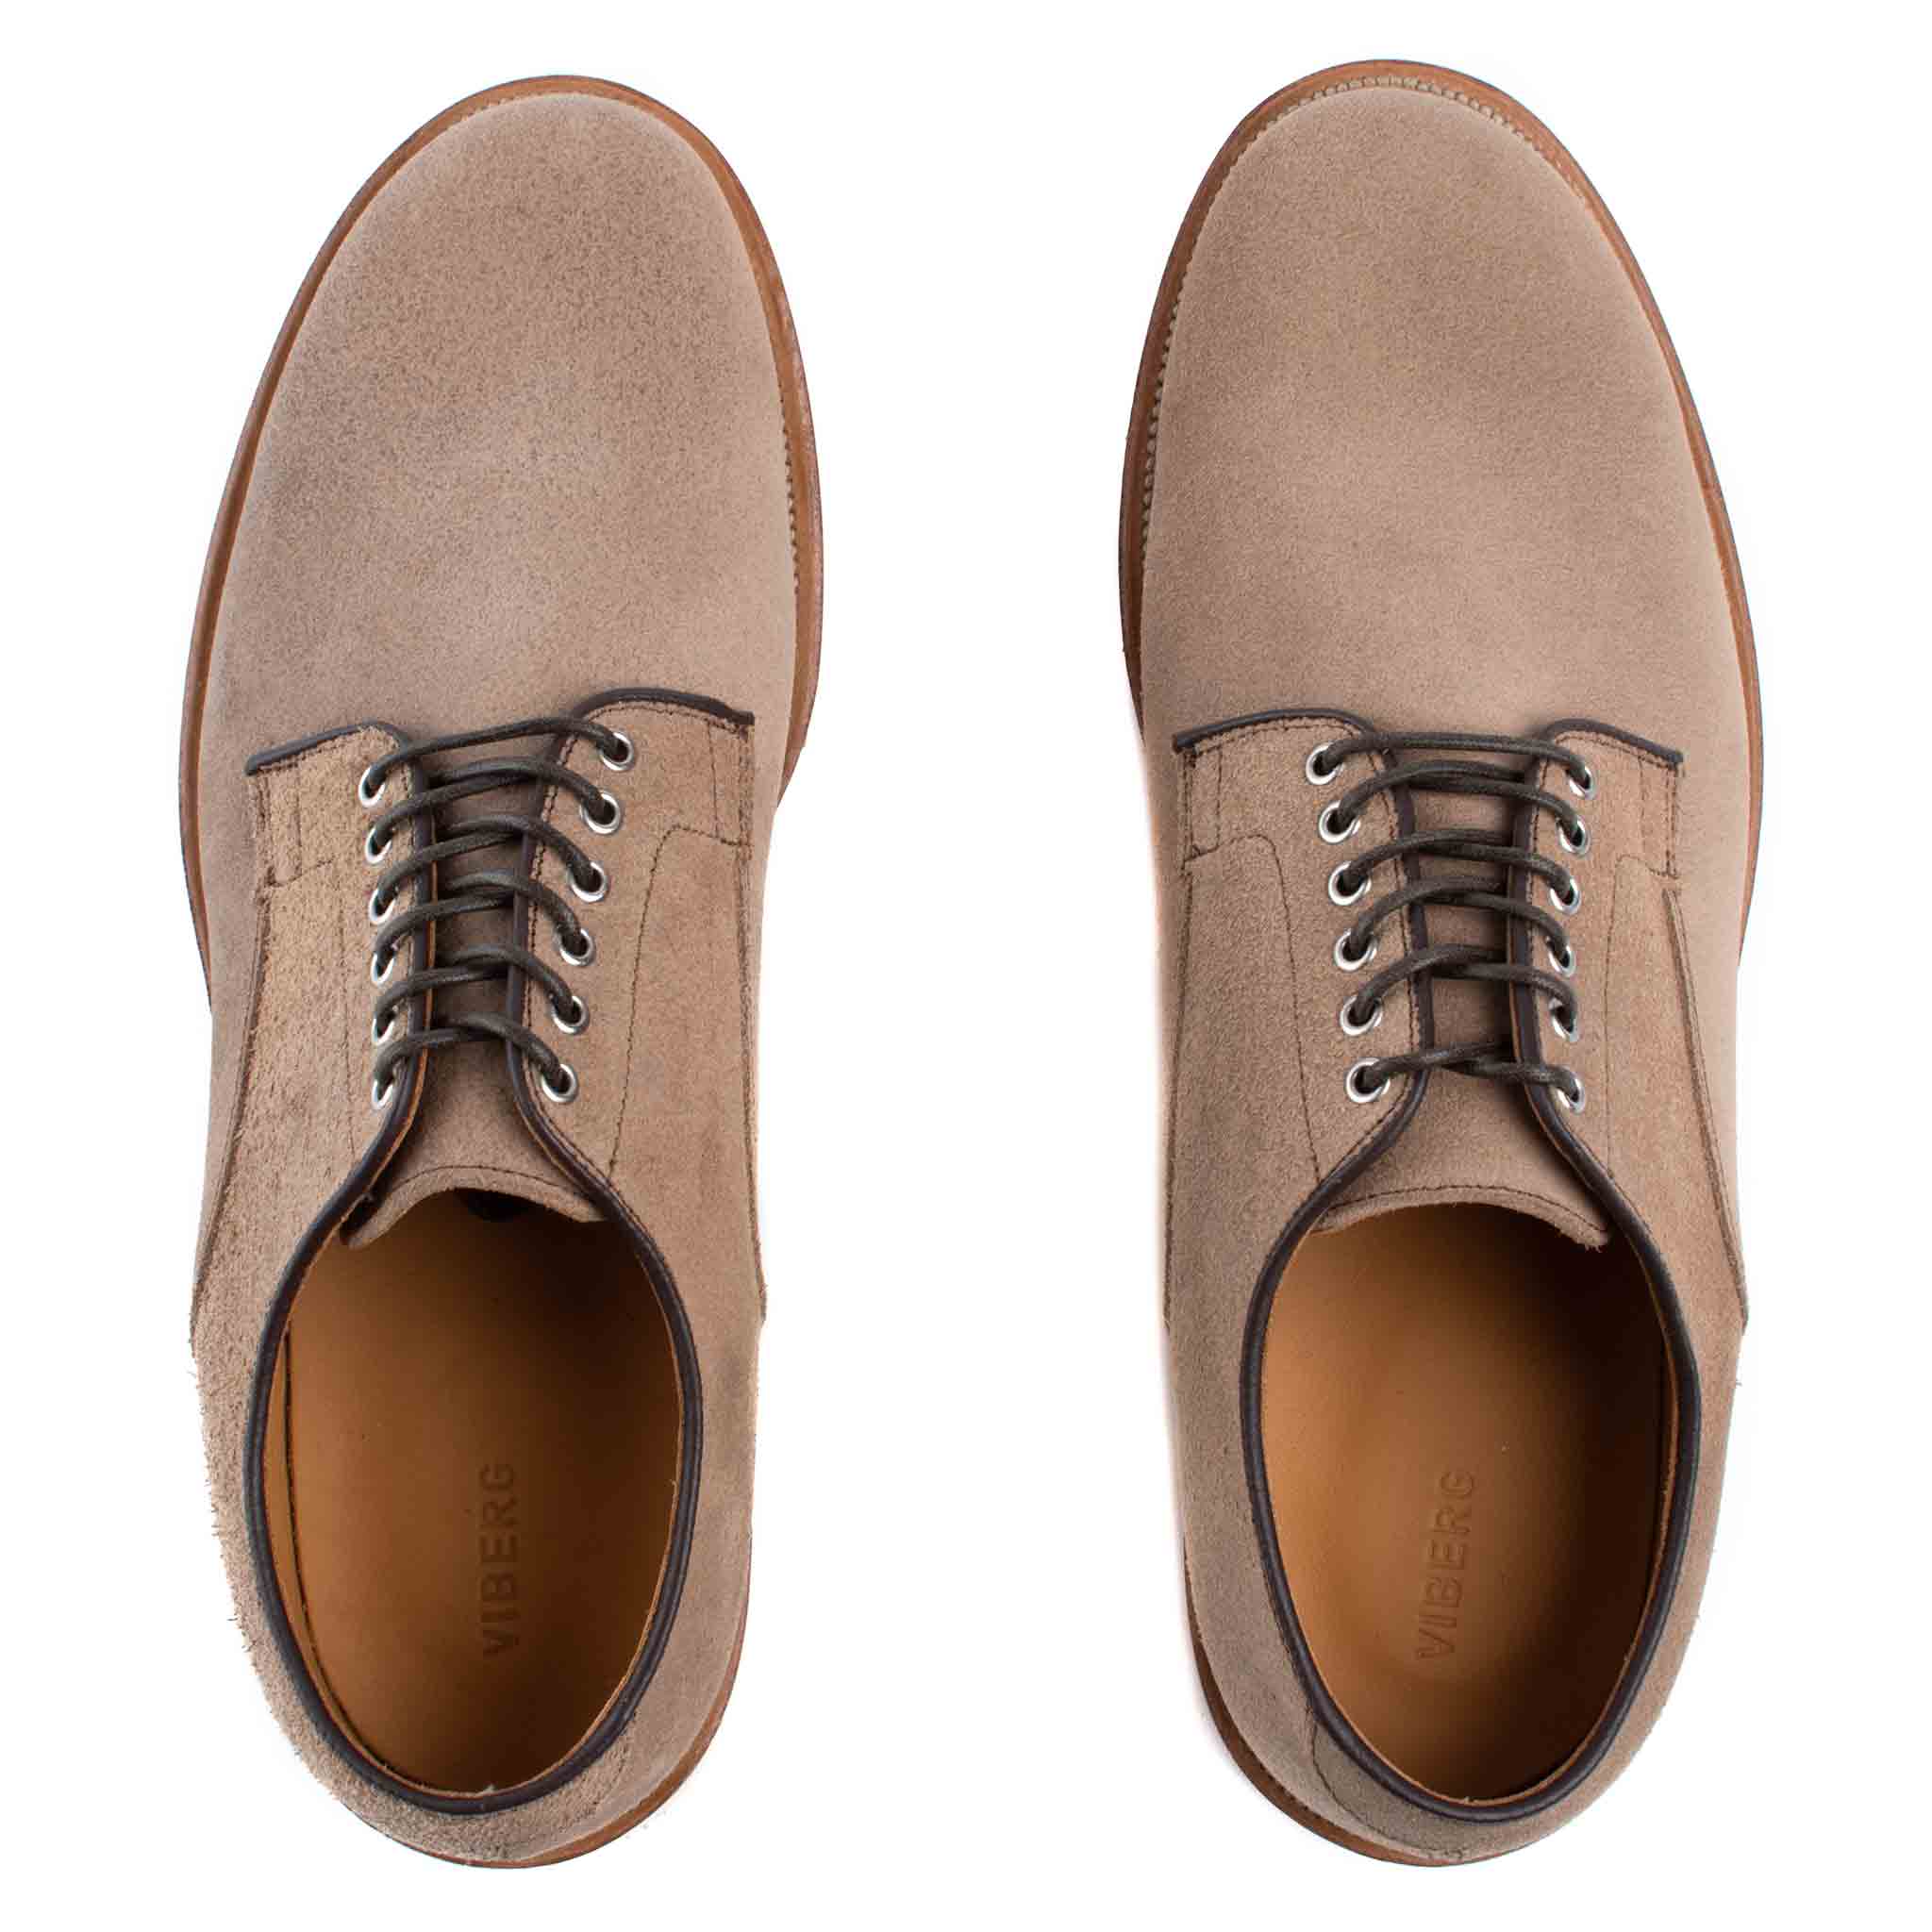 Viberg Natural Chromexcel Roughout Derby Shoe Top